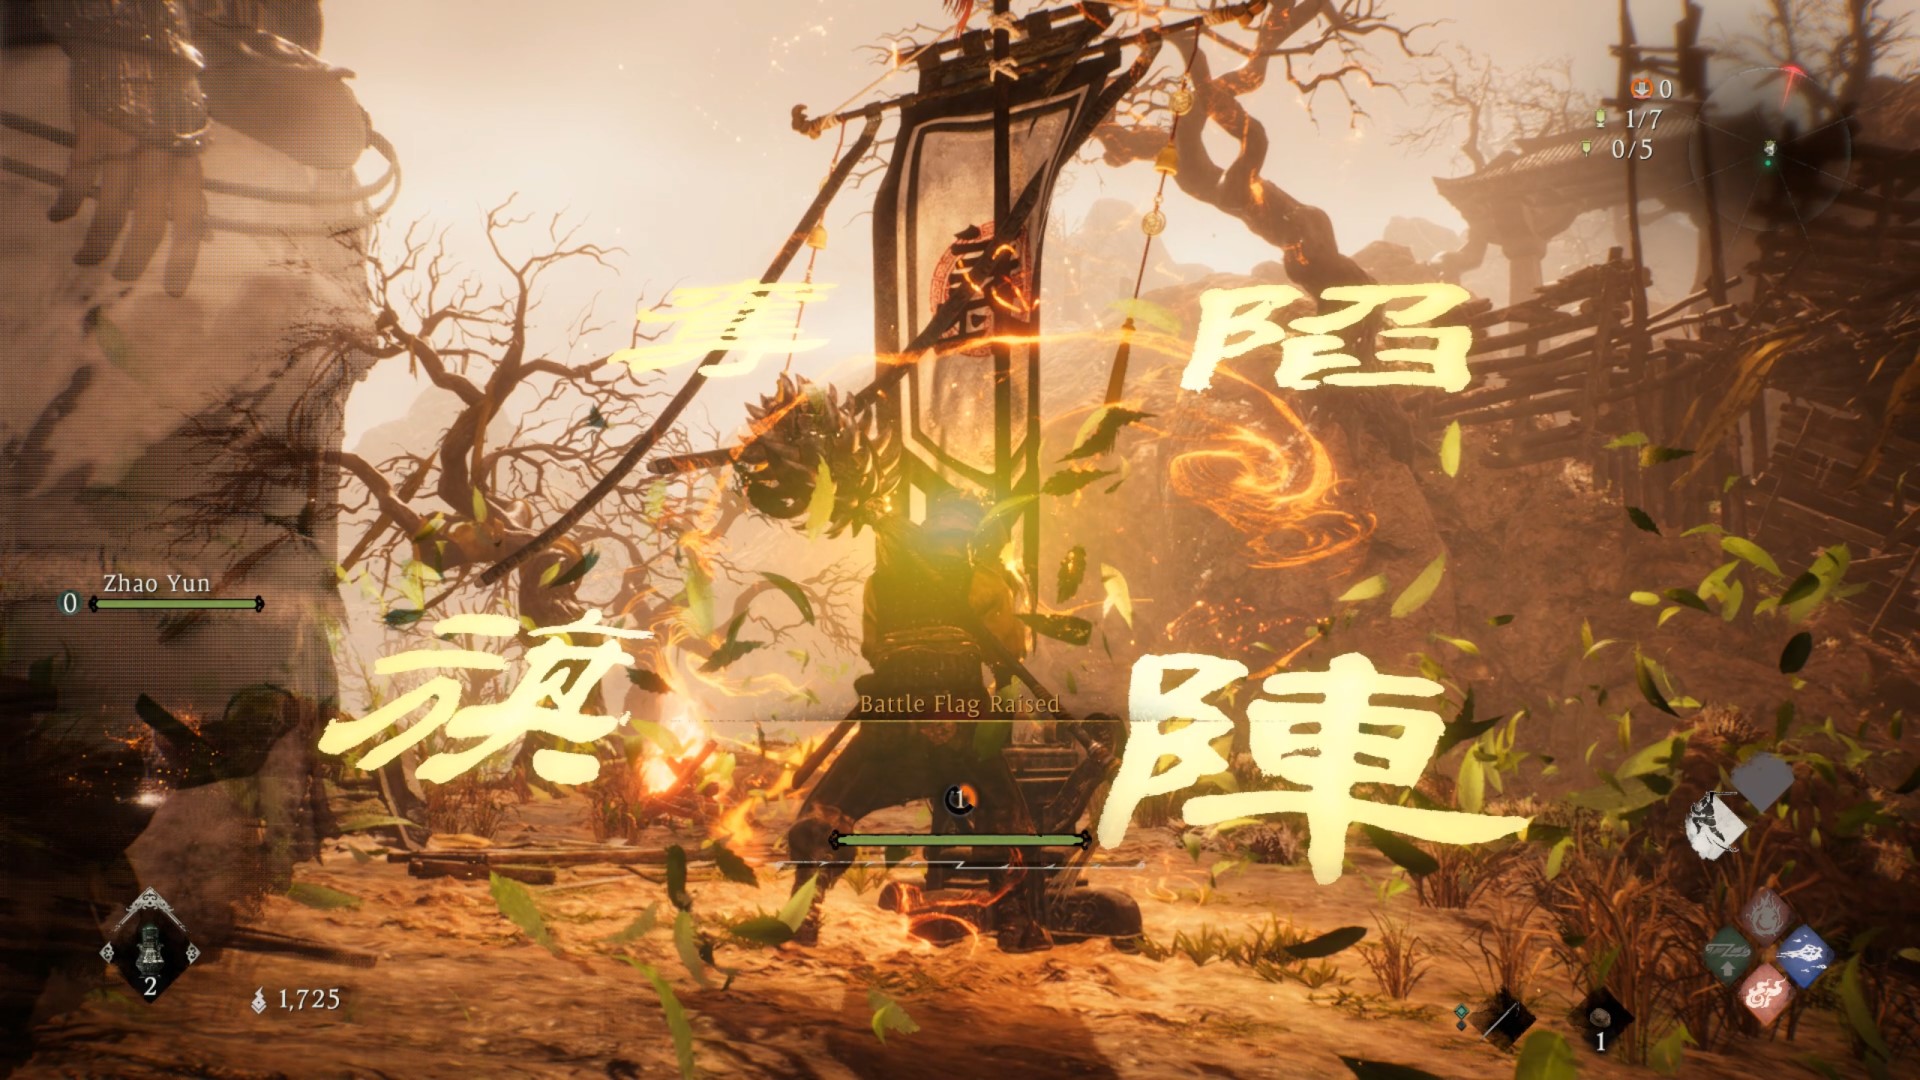 Wo Long Fallen Dynasty hands on: A warrior raises a battle flag on an arid battlefield, and ghostly Chinese characters in gold hover around the altar where he places it